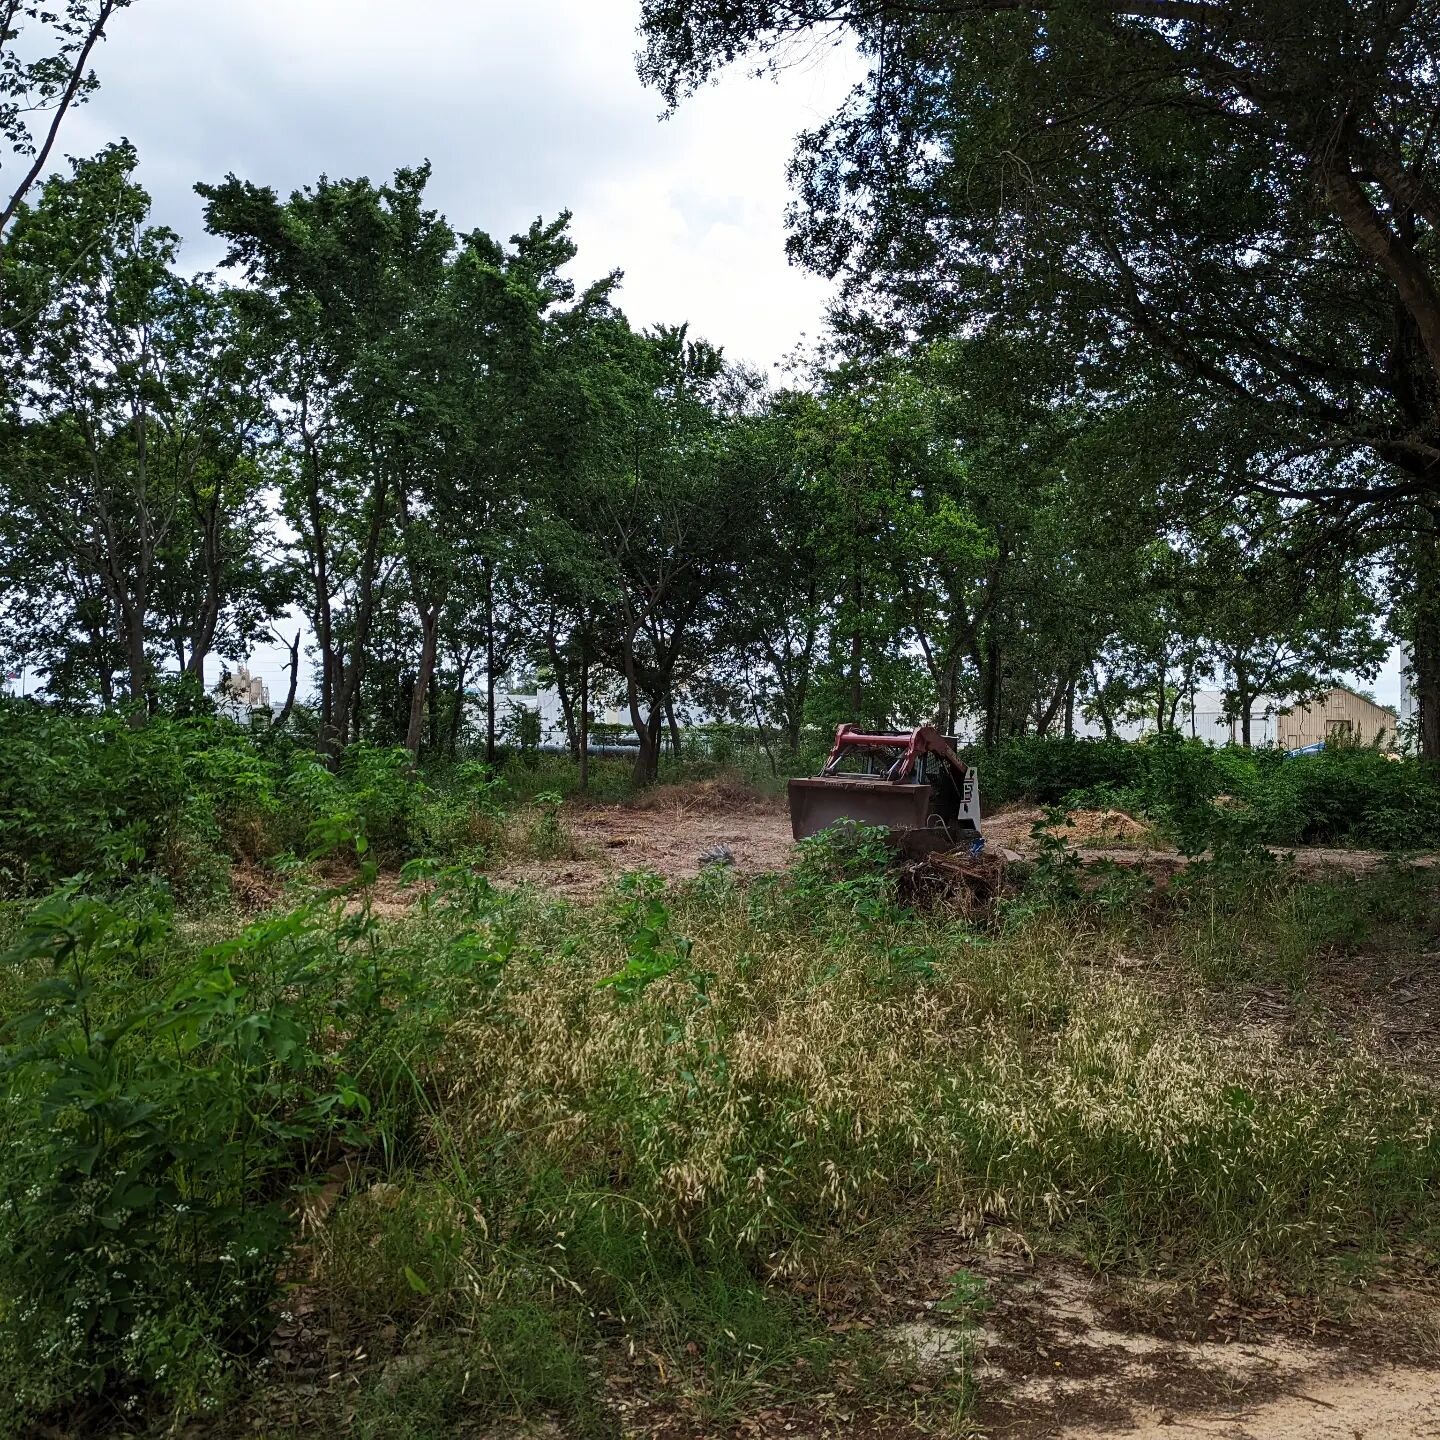 Your new beer garden will be nestled in a forest next to the historic silo.
.
.
.
.
.
#beergarden #nightlife #katytexas #cardiffricedryer